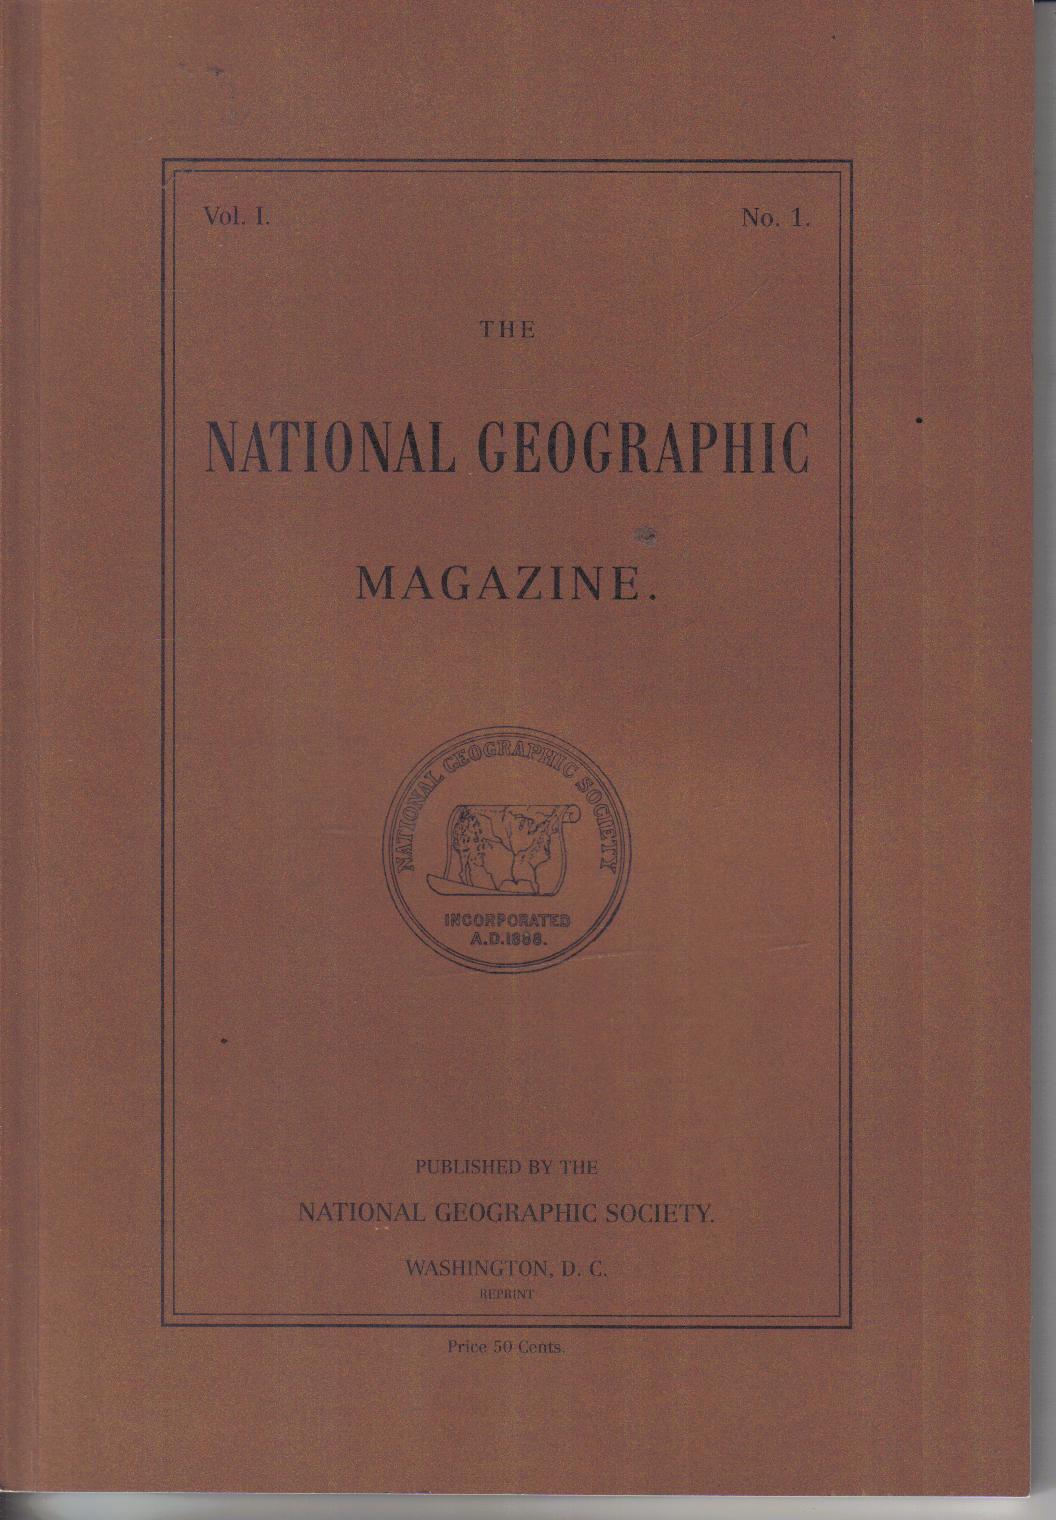 The National Geographic Magazine Vol. 1 No. 1